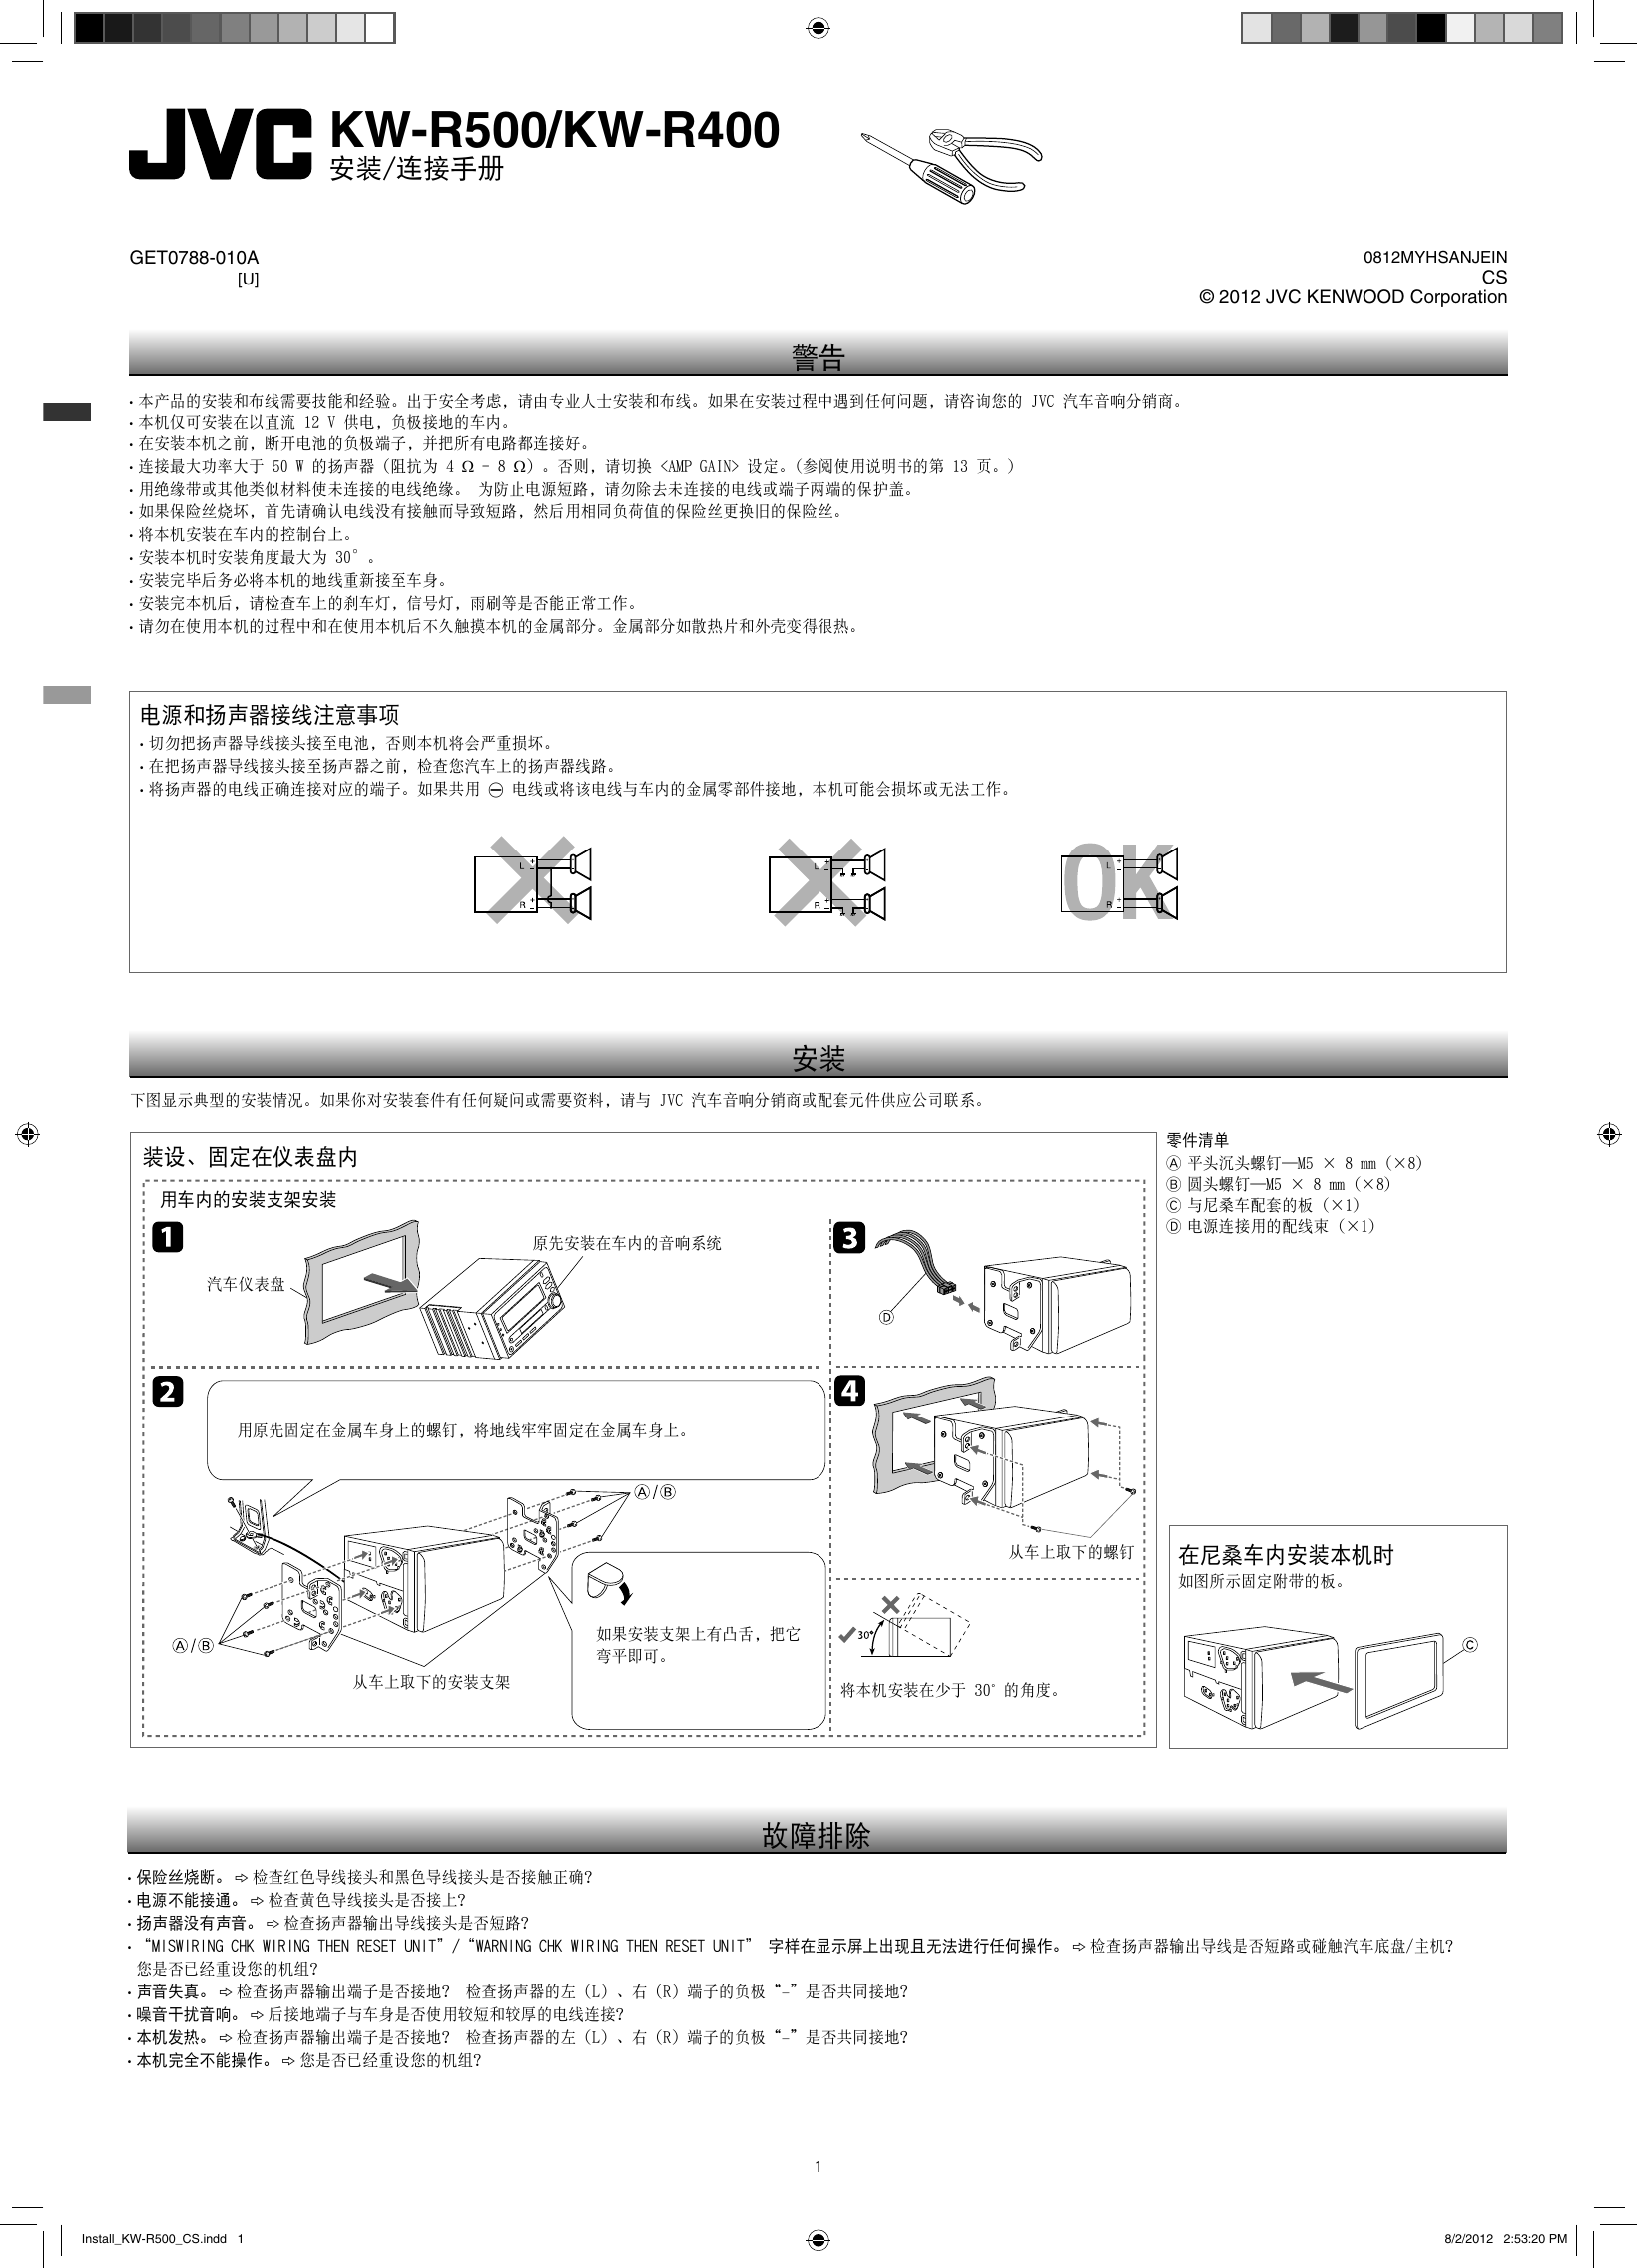 Page 1 of 2 - JVC KW-R500 KW-R500/KW-R400 User Manual INSTALLATION  GET0788-010A